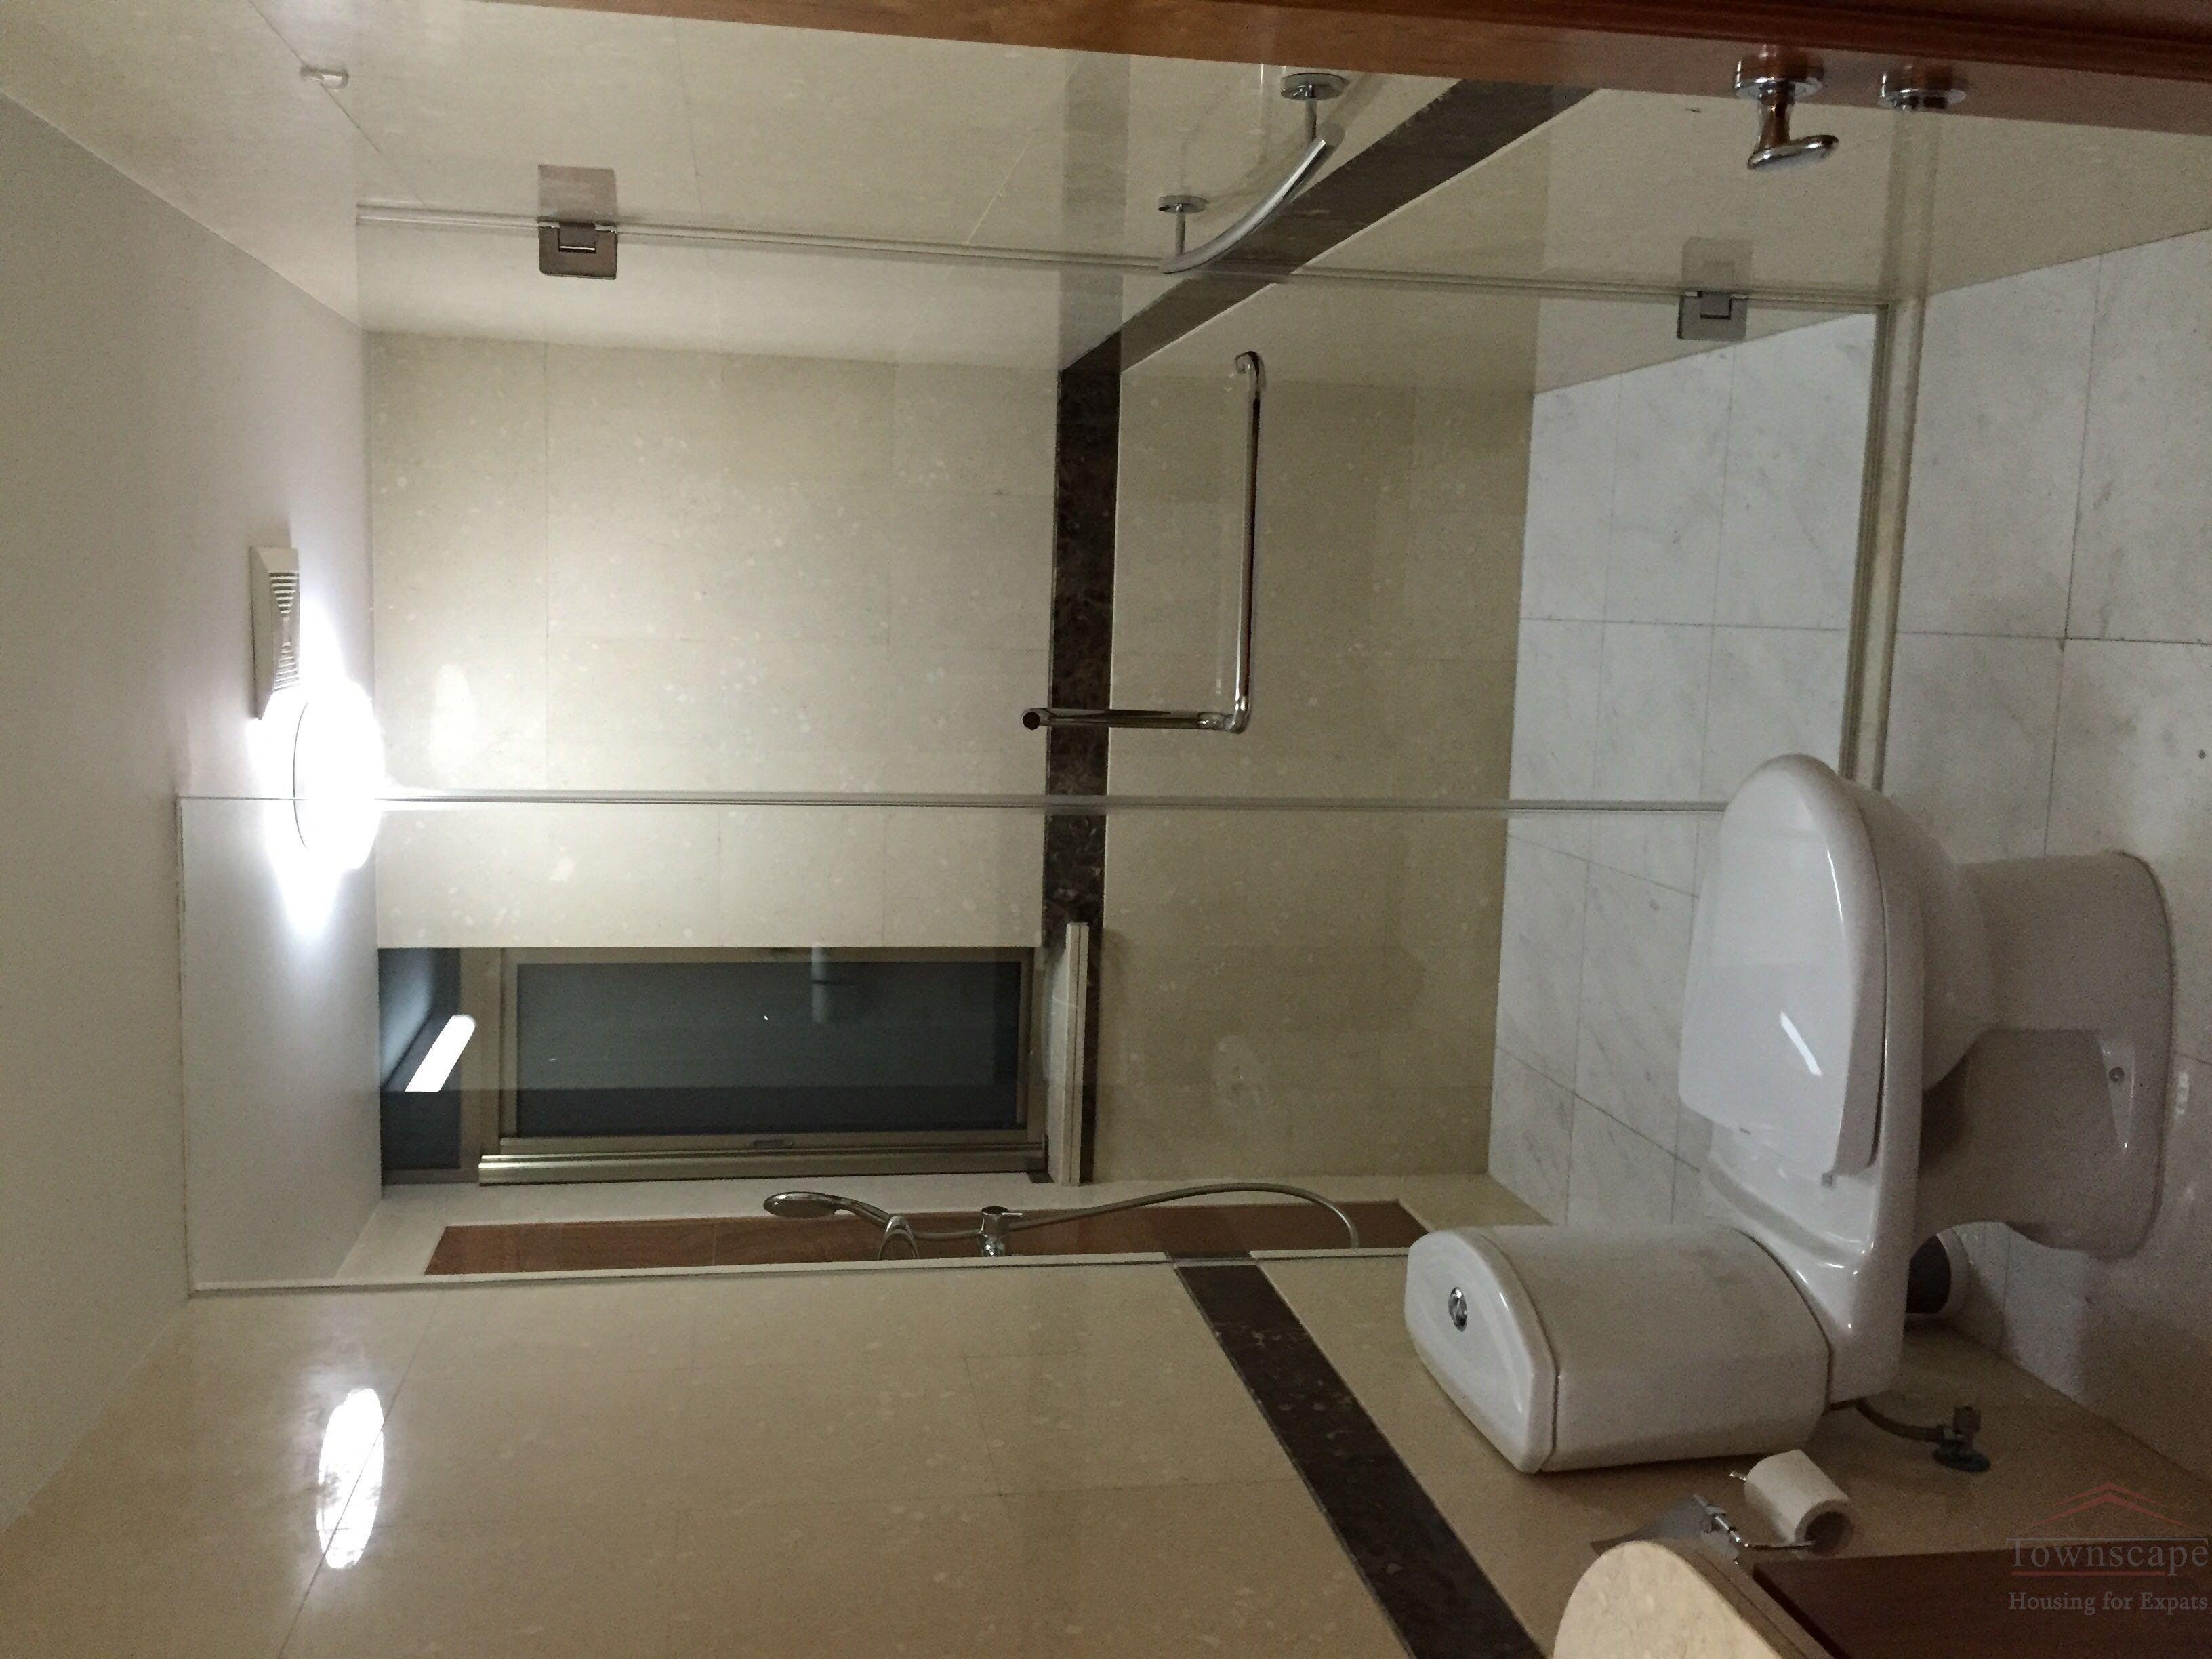  Spacious 3BR Apartment for rent in Le Marquis, near Jiashan Road Metro